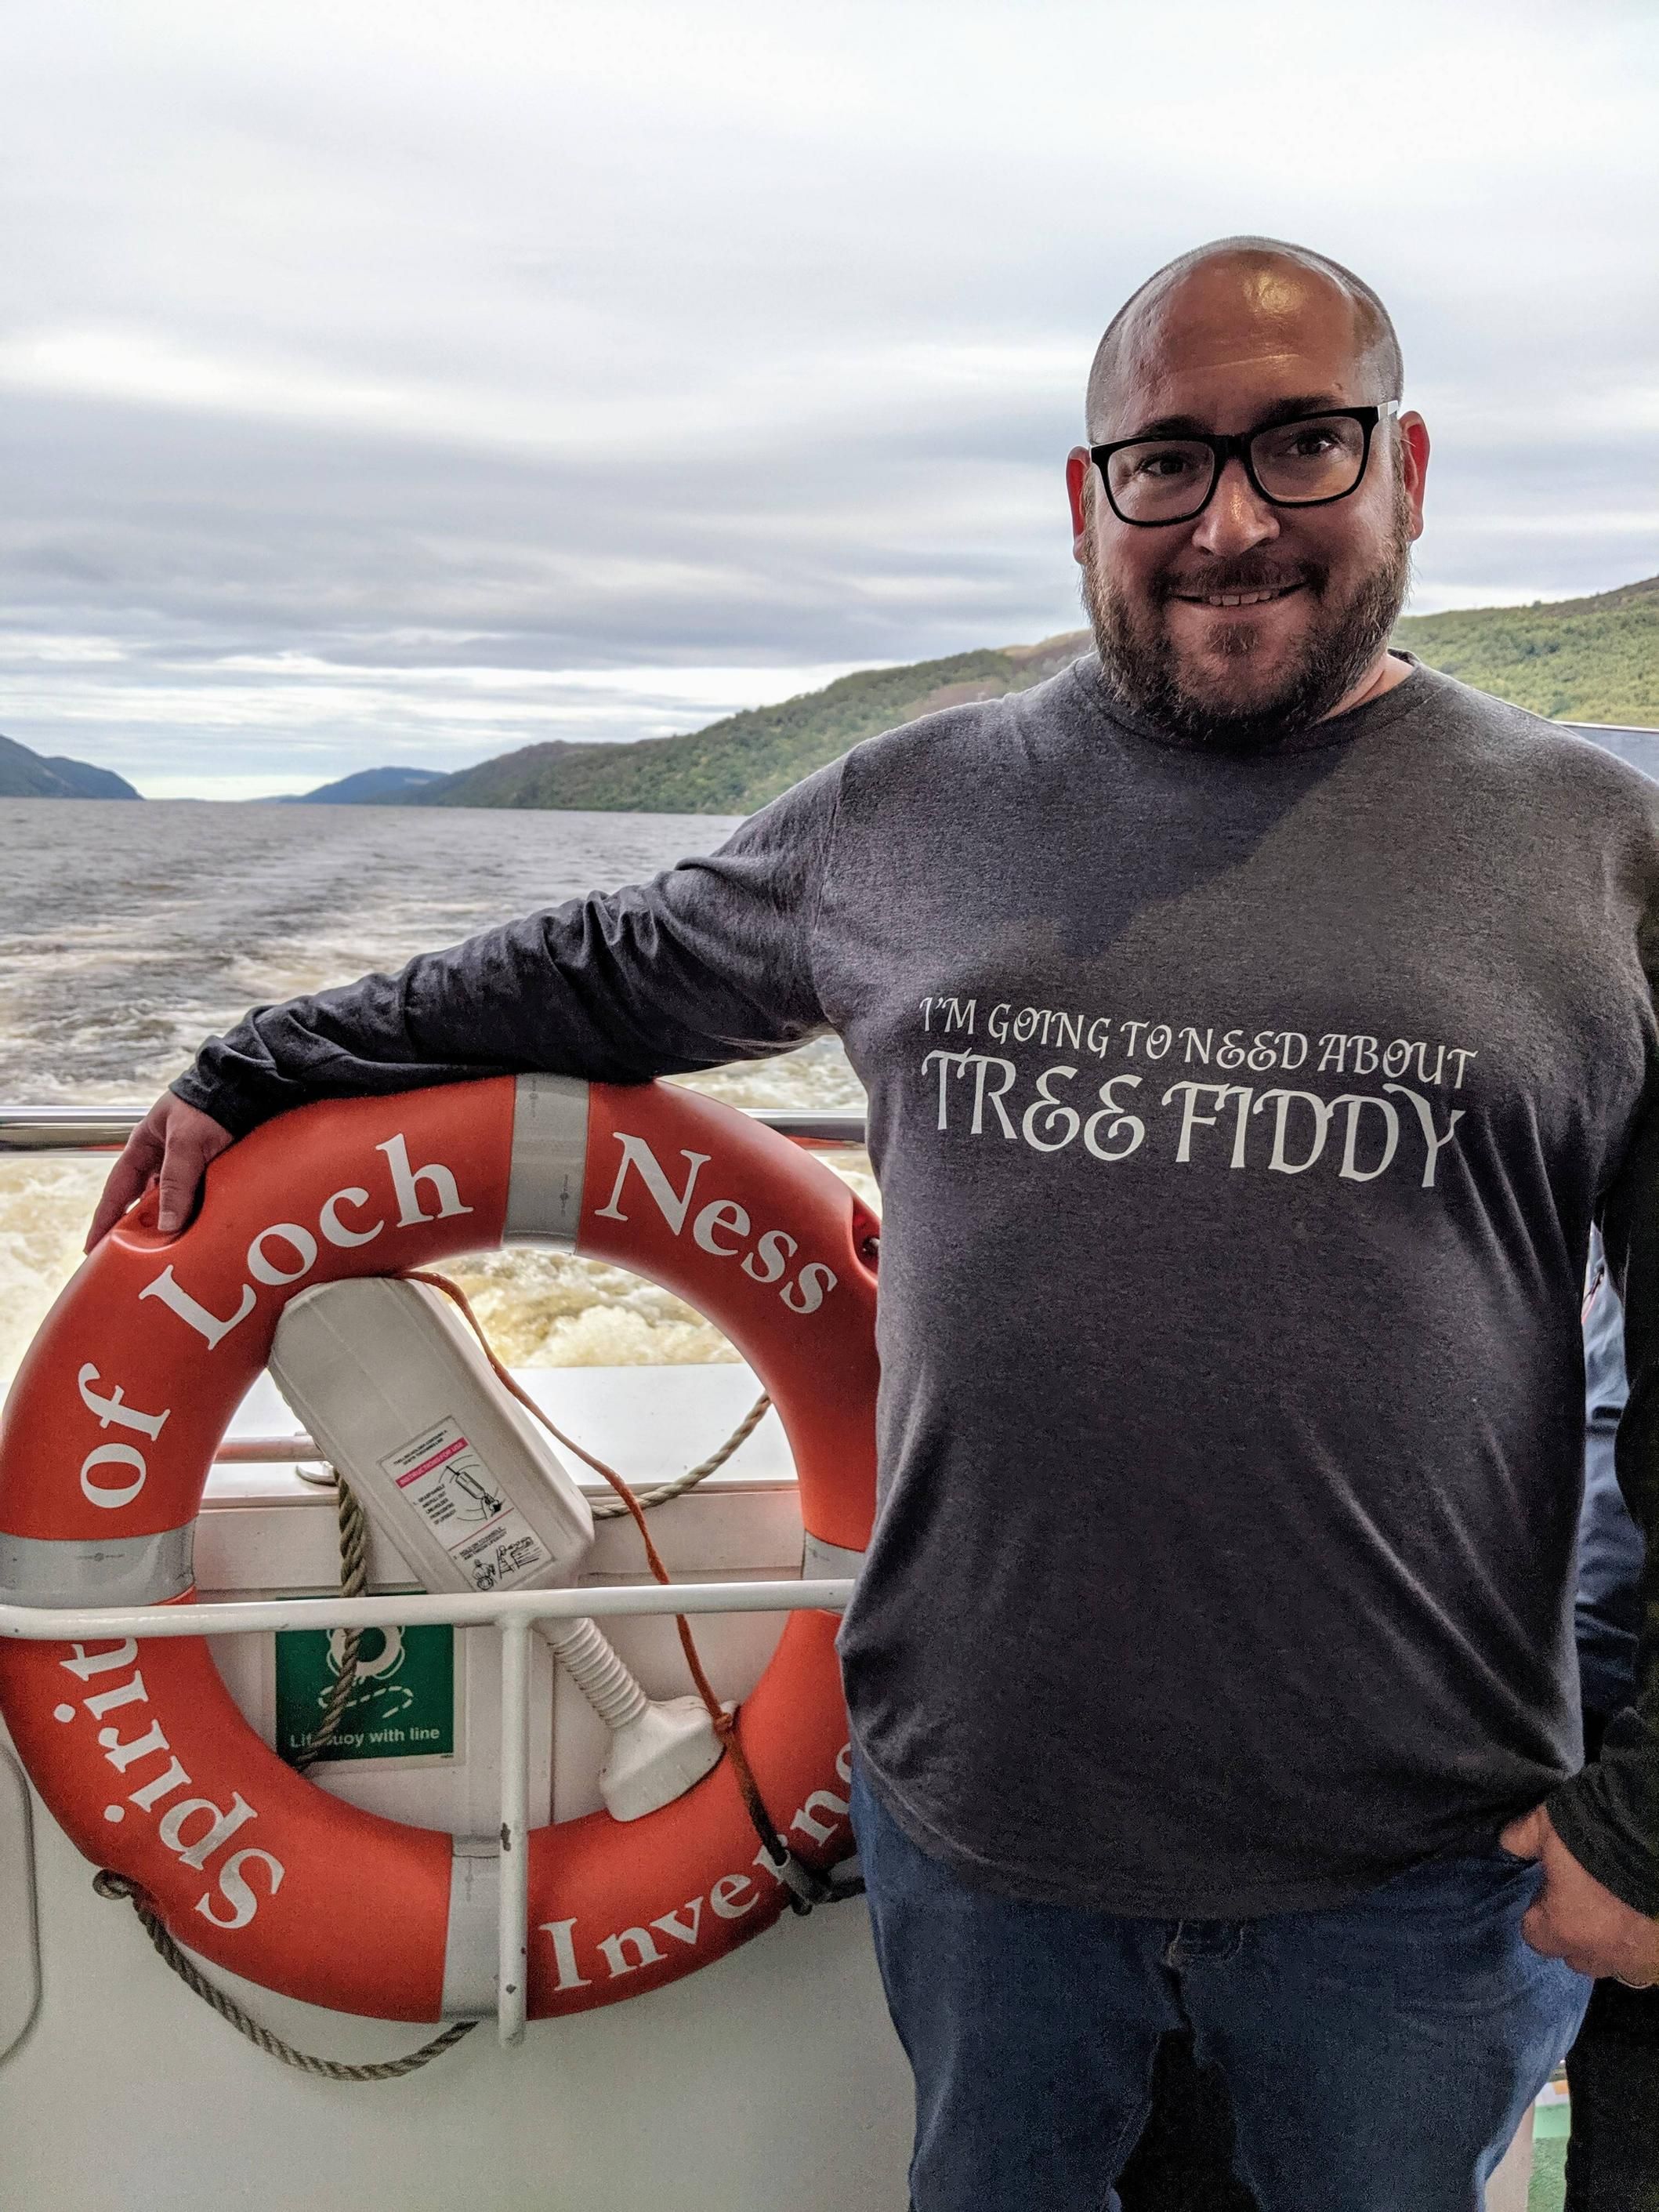 I traveled to Loch Ness to let the people know that...